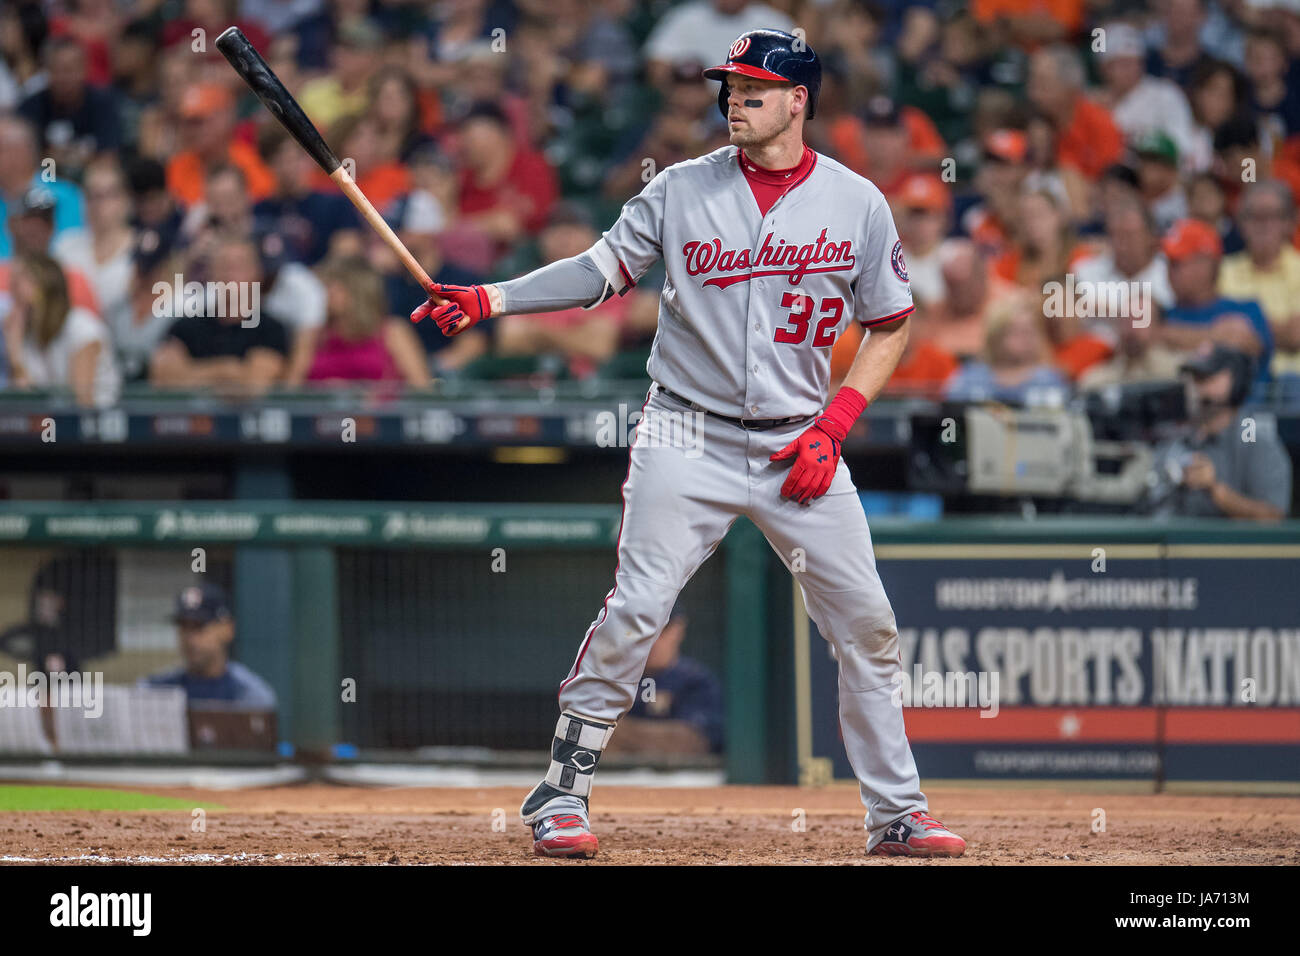 August 23, 2017: Washington Nationals catcher Matt Wieters (32) bats during a Major League Baseball game between the Houston Astros and the Washington Nationals at Minute Maid Park in Houston, TX. The Astros won the game 6-1...Trask Smith/CSM Stock Photo